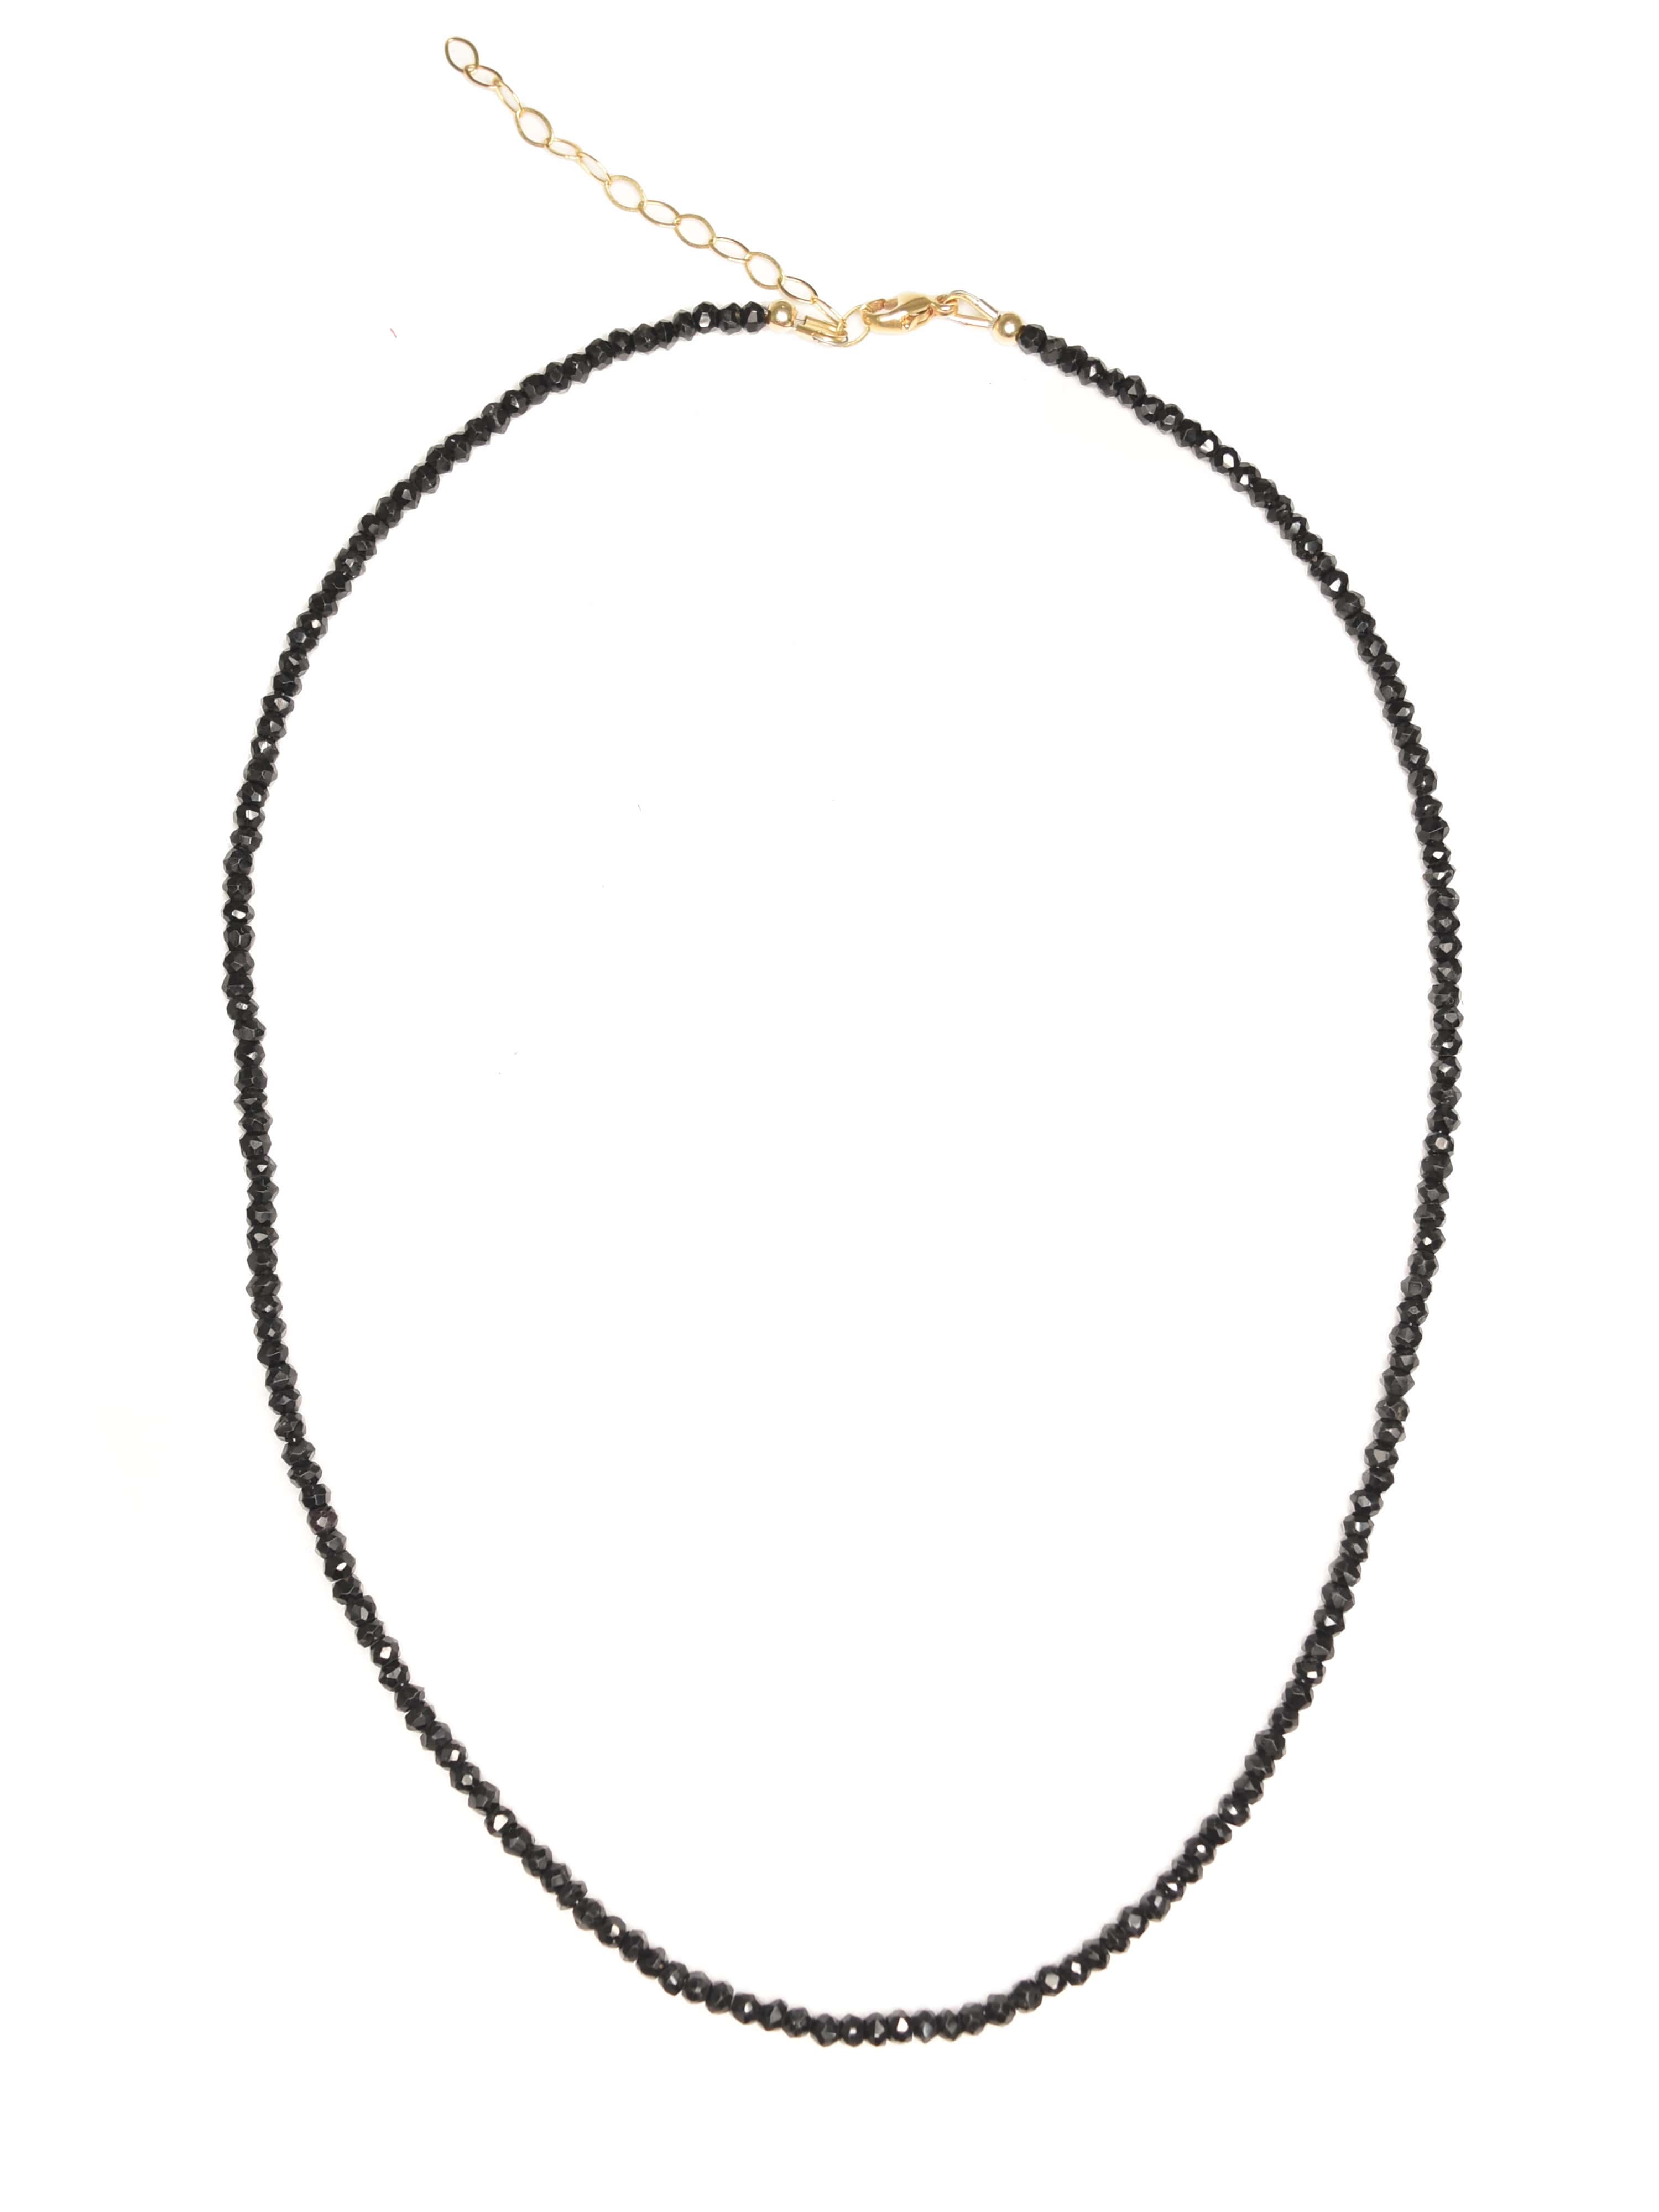 Black Spinel Dainty Beaded Necklace